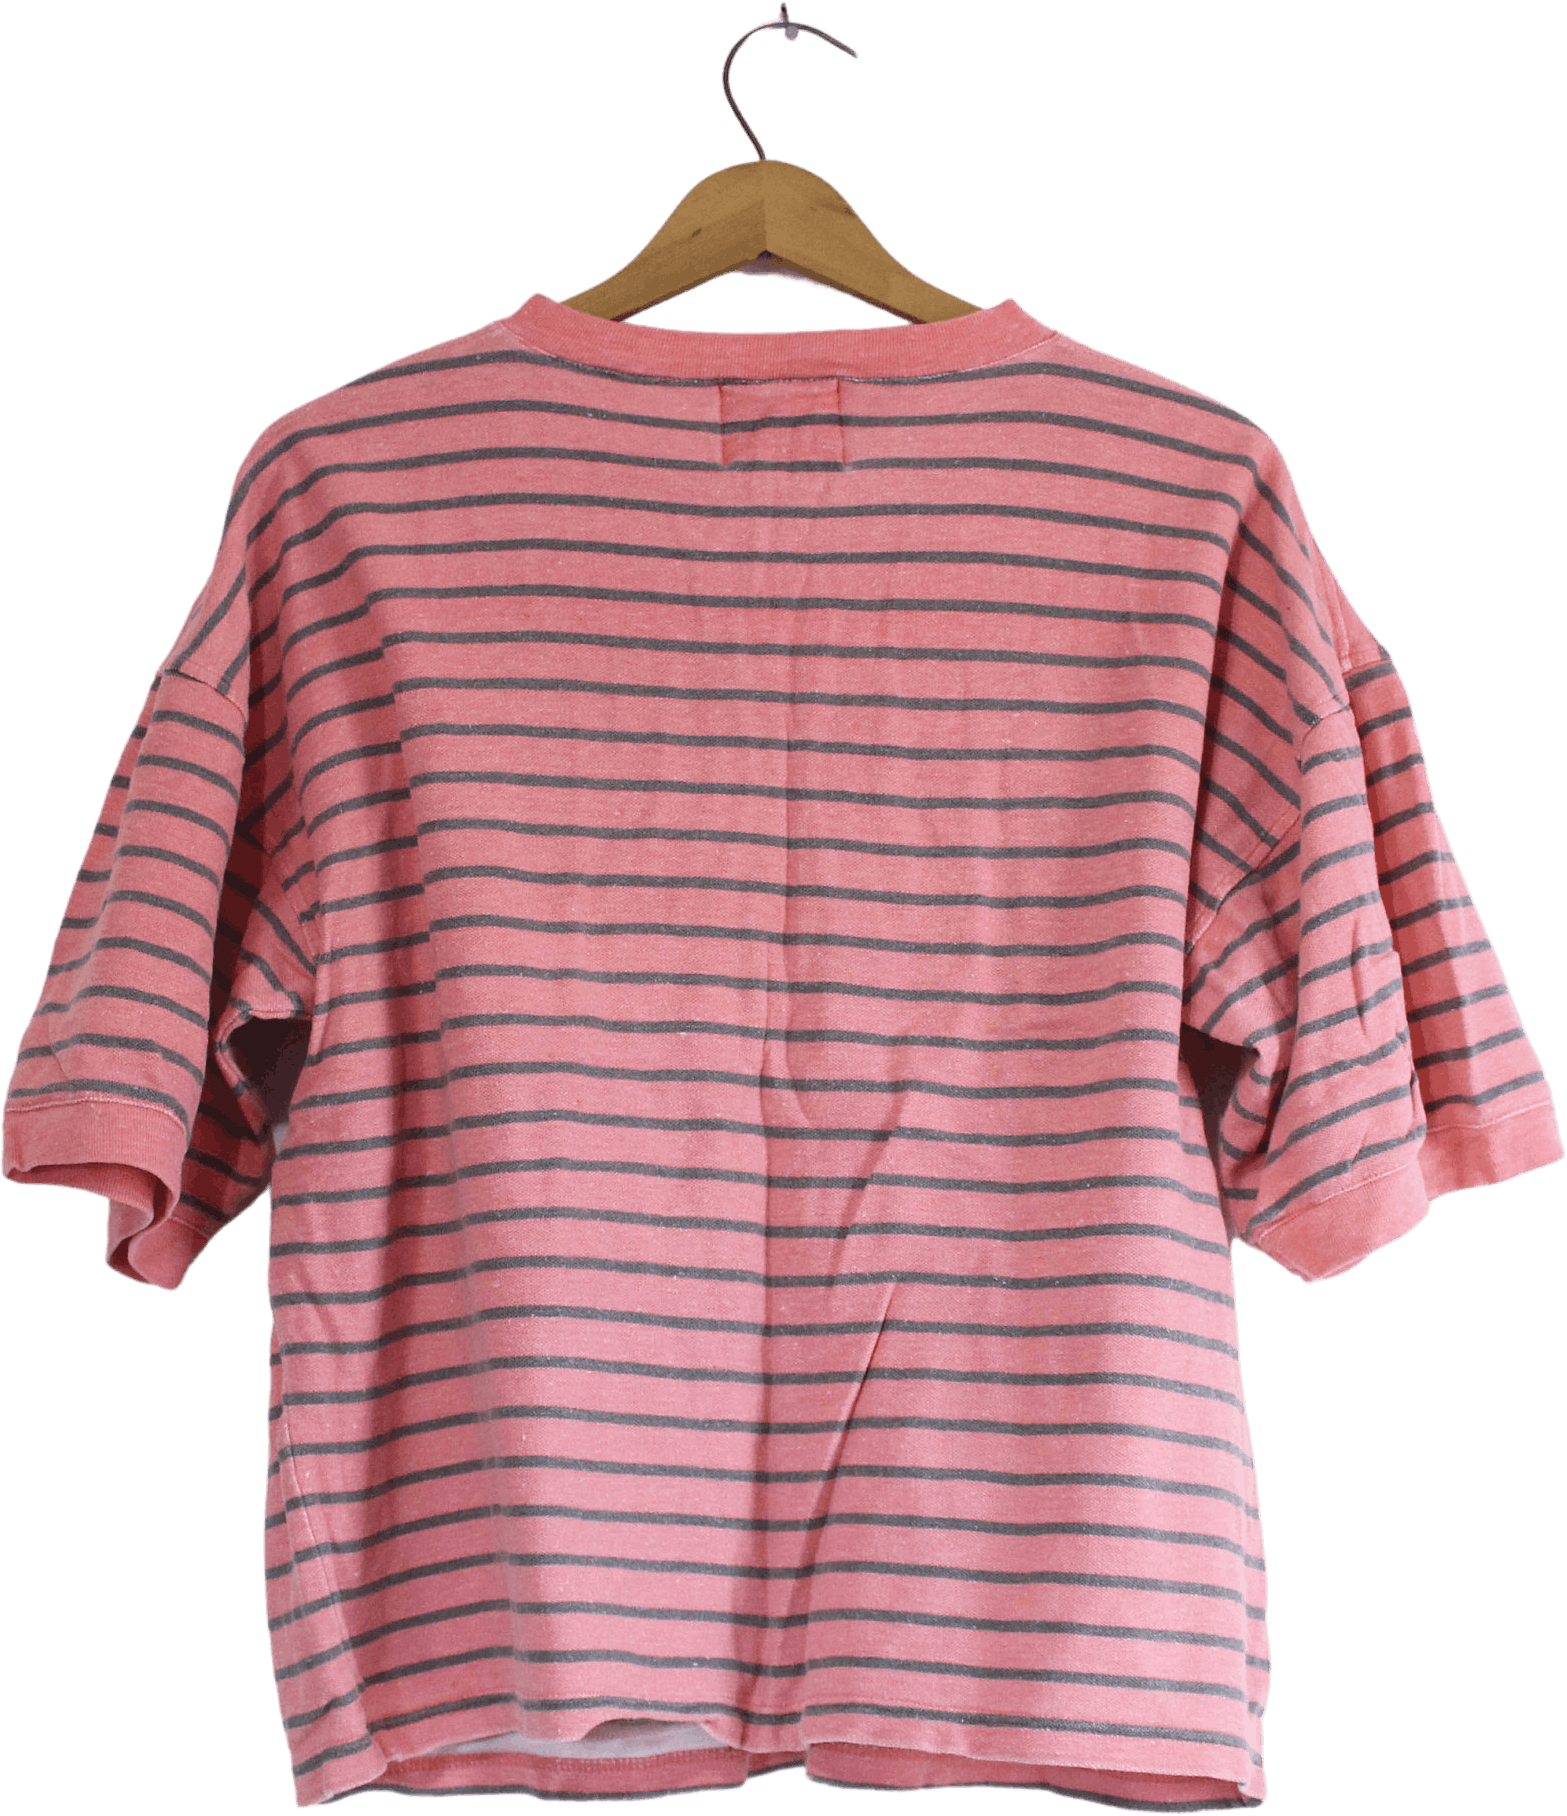 Vintage Coral and Gray Striped Crop Top by Bugle Boy | Shop THRILLING